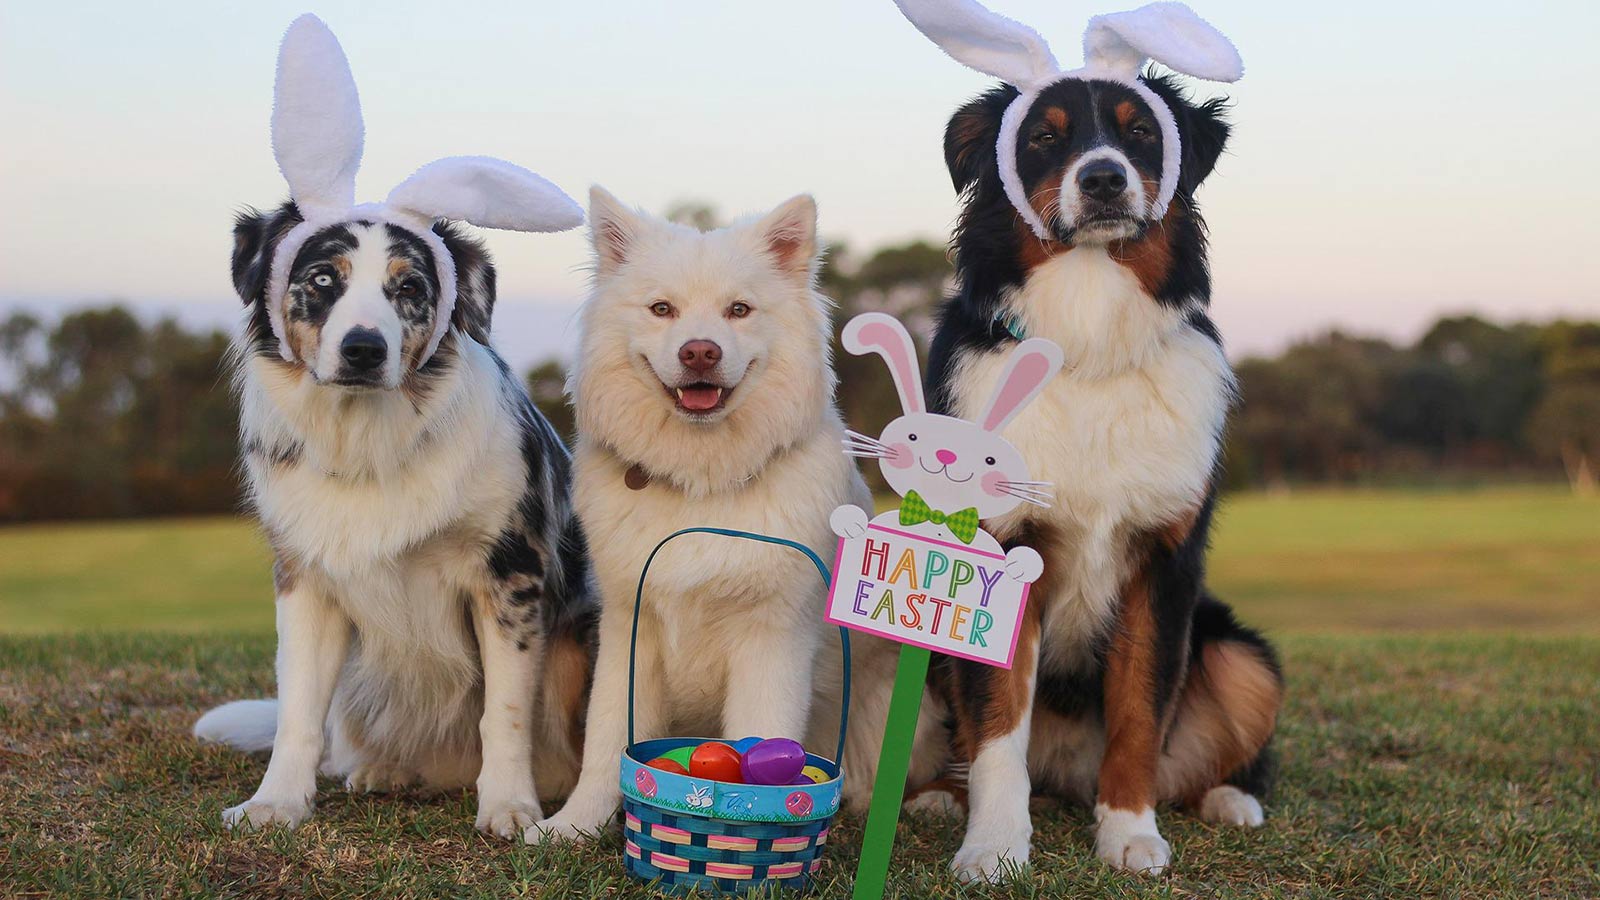 5 Best Dog Easter Gifts To Spoil Your Pup